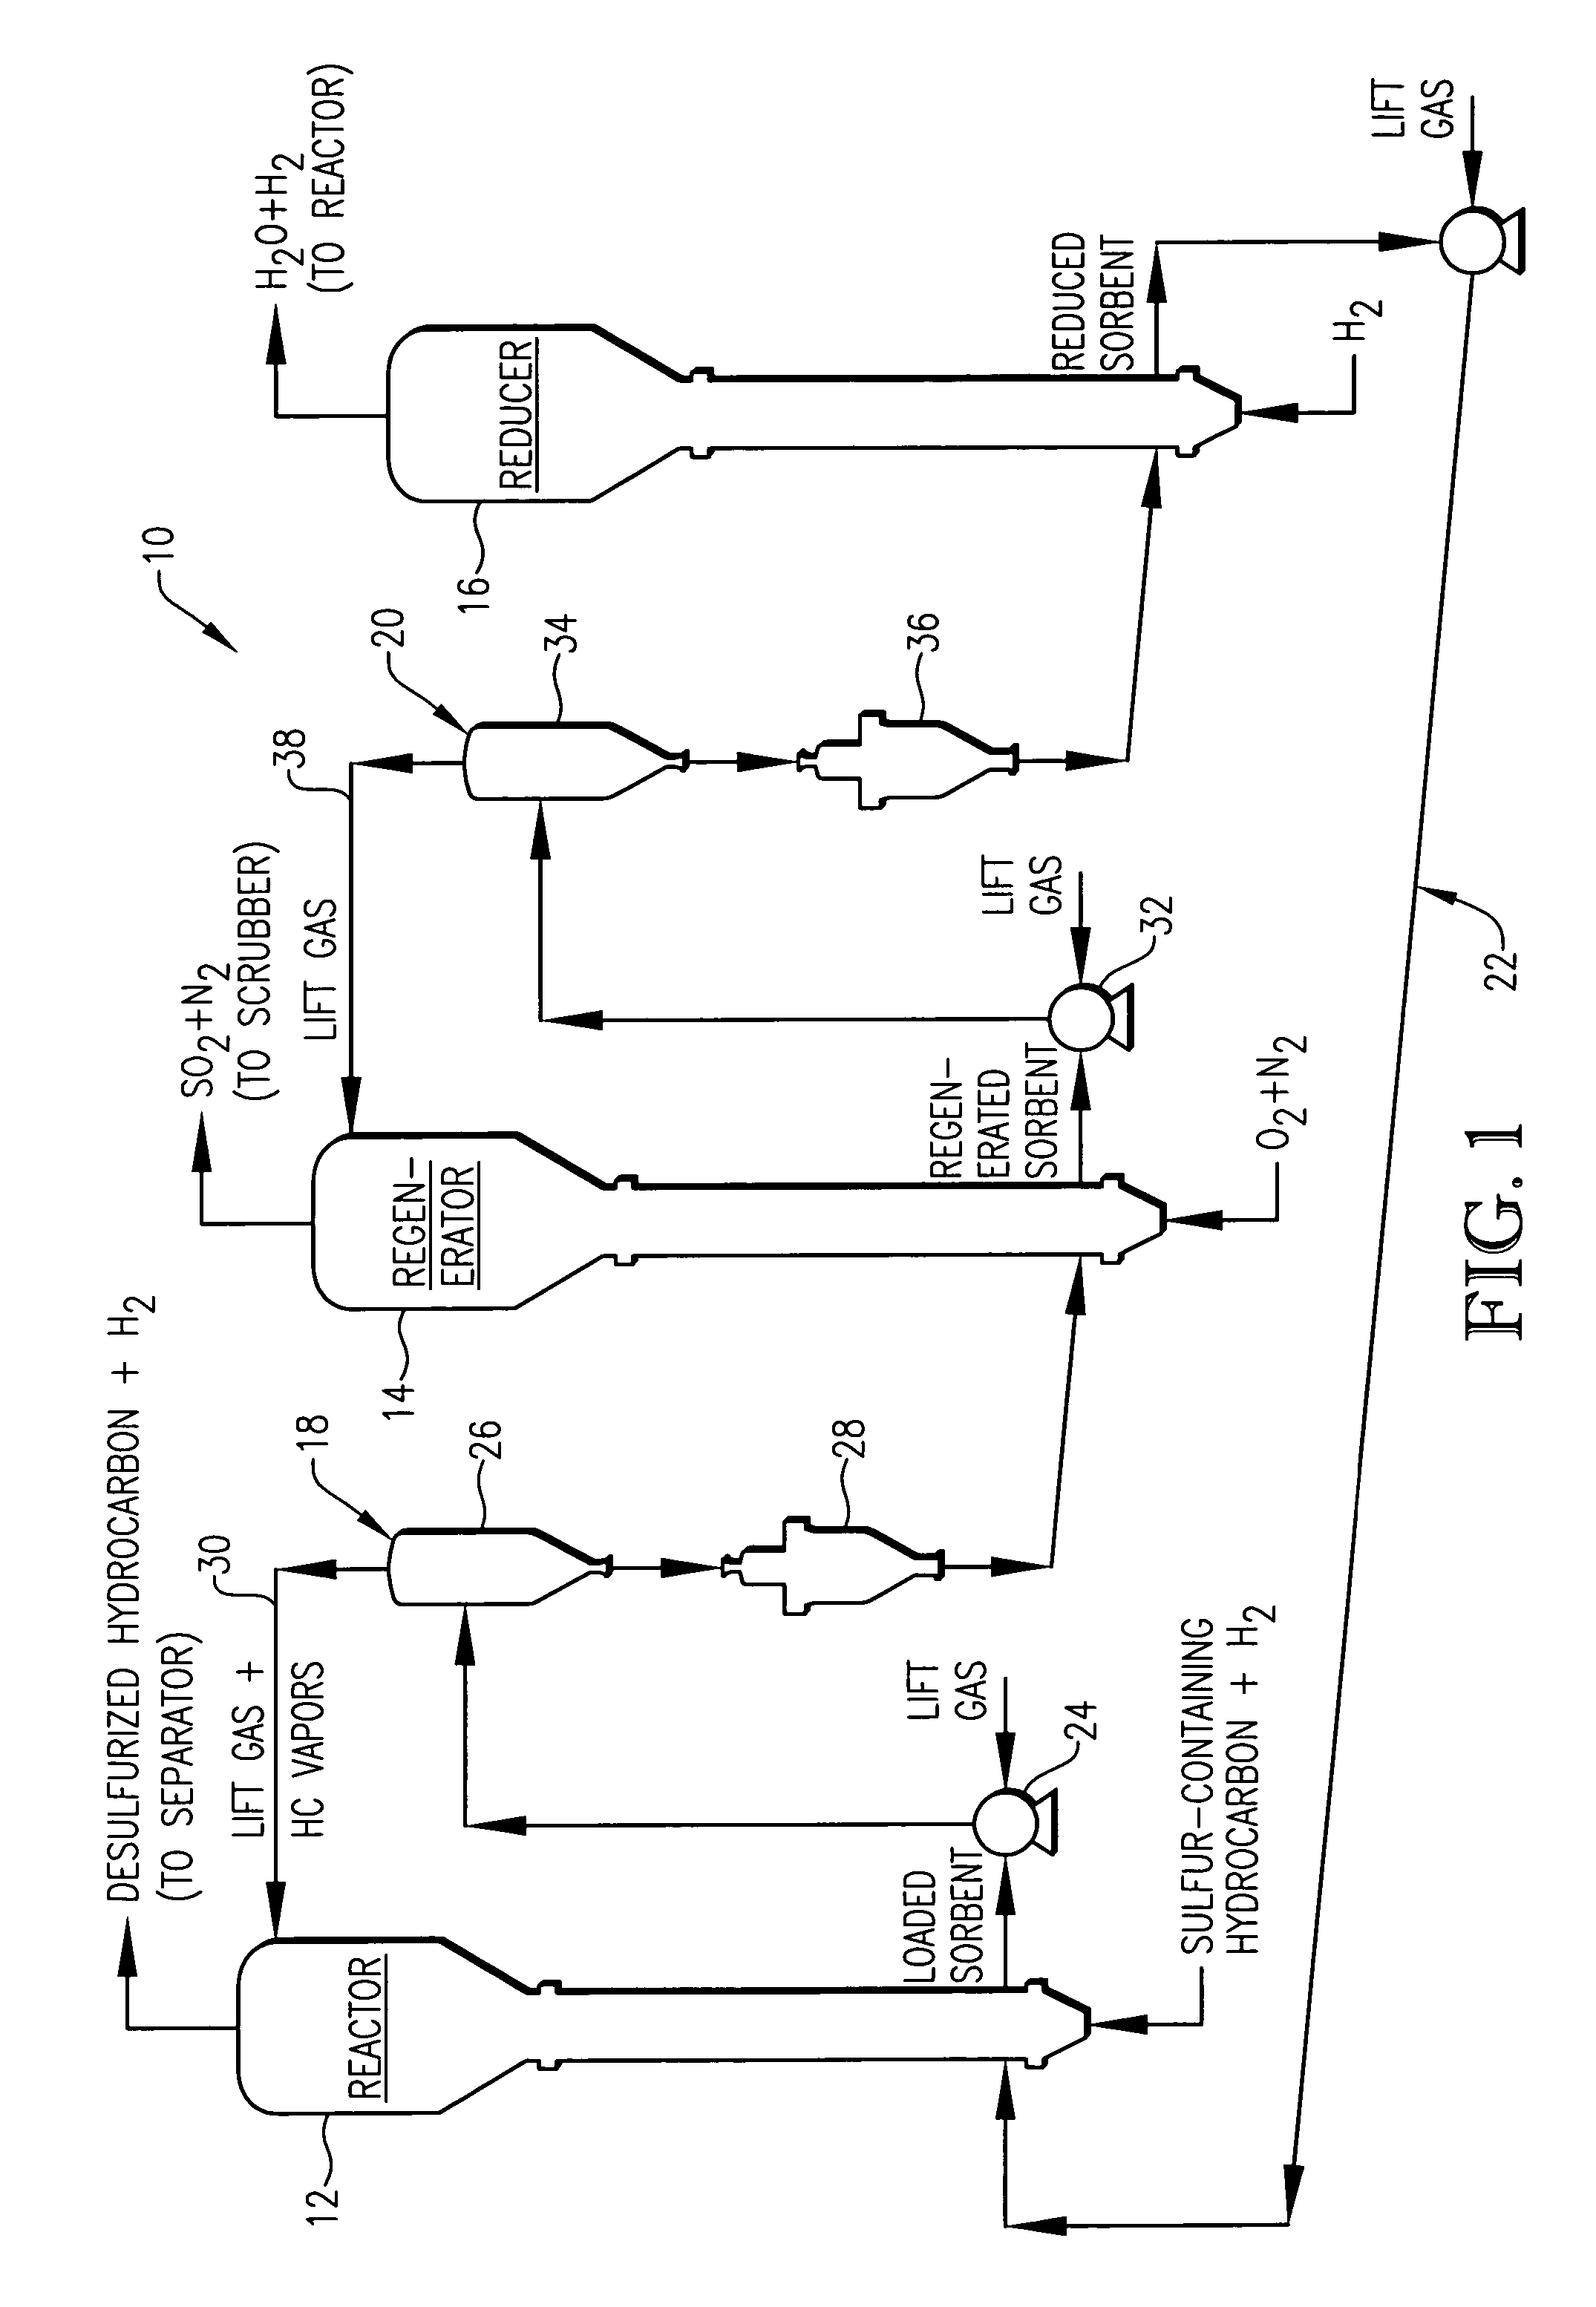 Desulfurization in turbulent fluid bed reactor